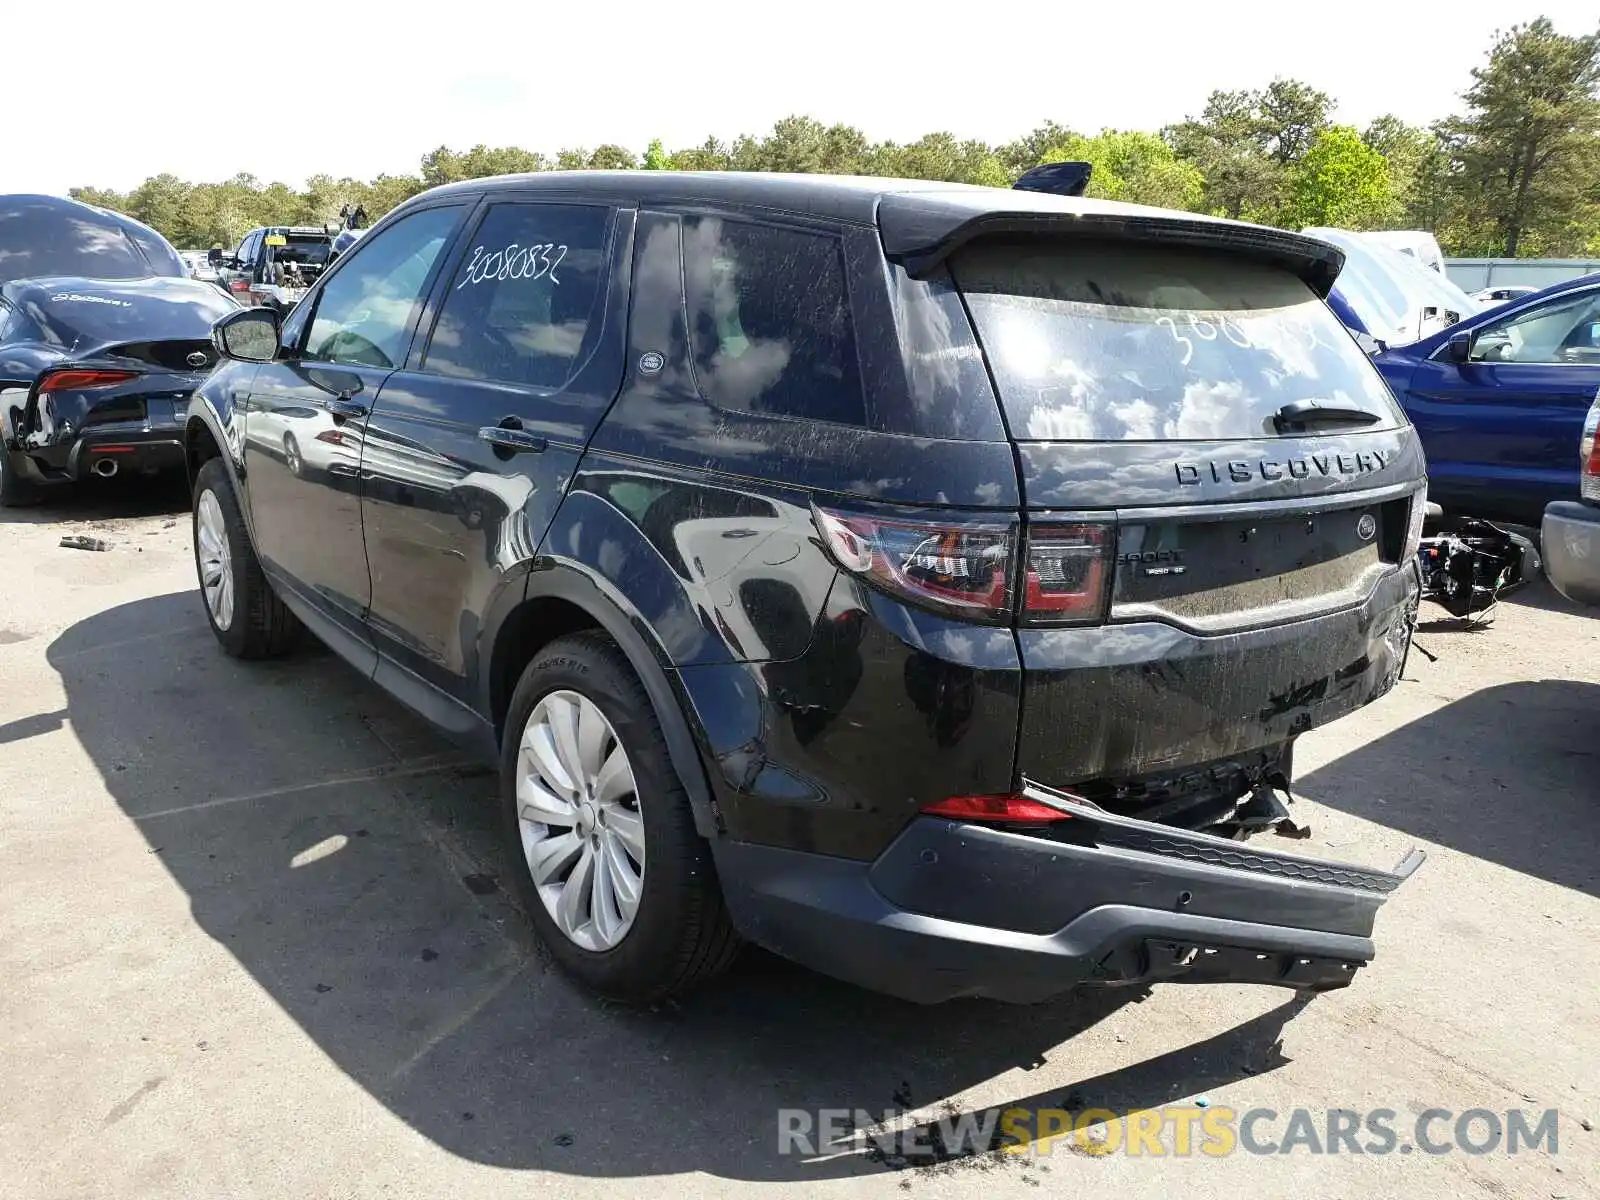 3 Photograph of a damaged car SALCP2FX6LH846169 LAND ROVER DISCOVERY 2020